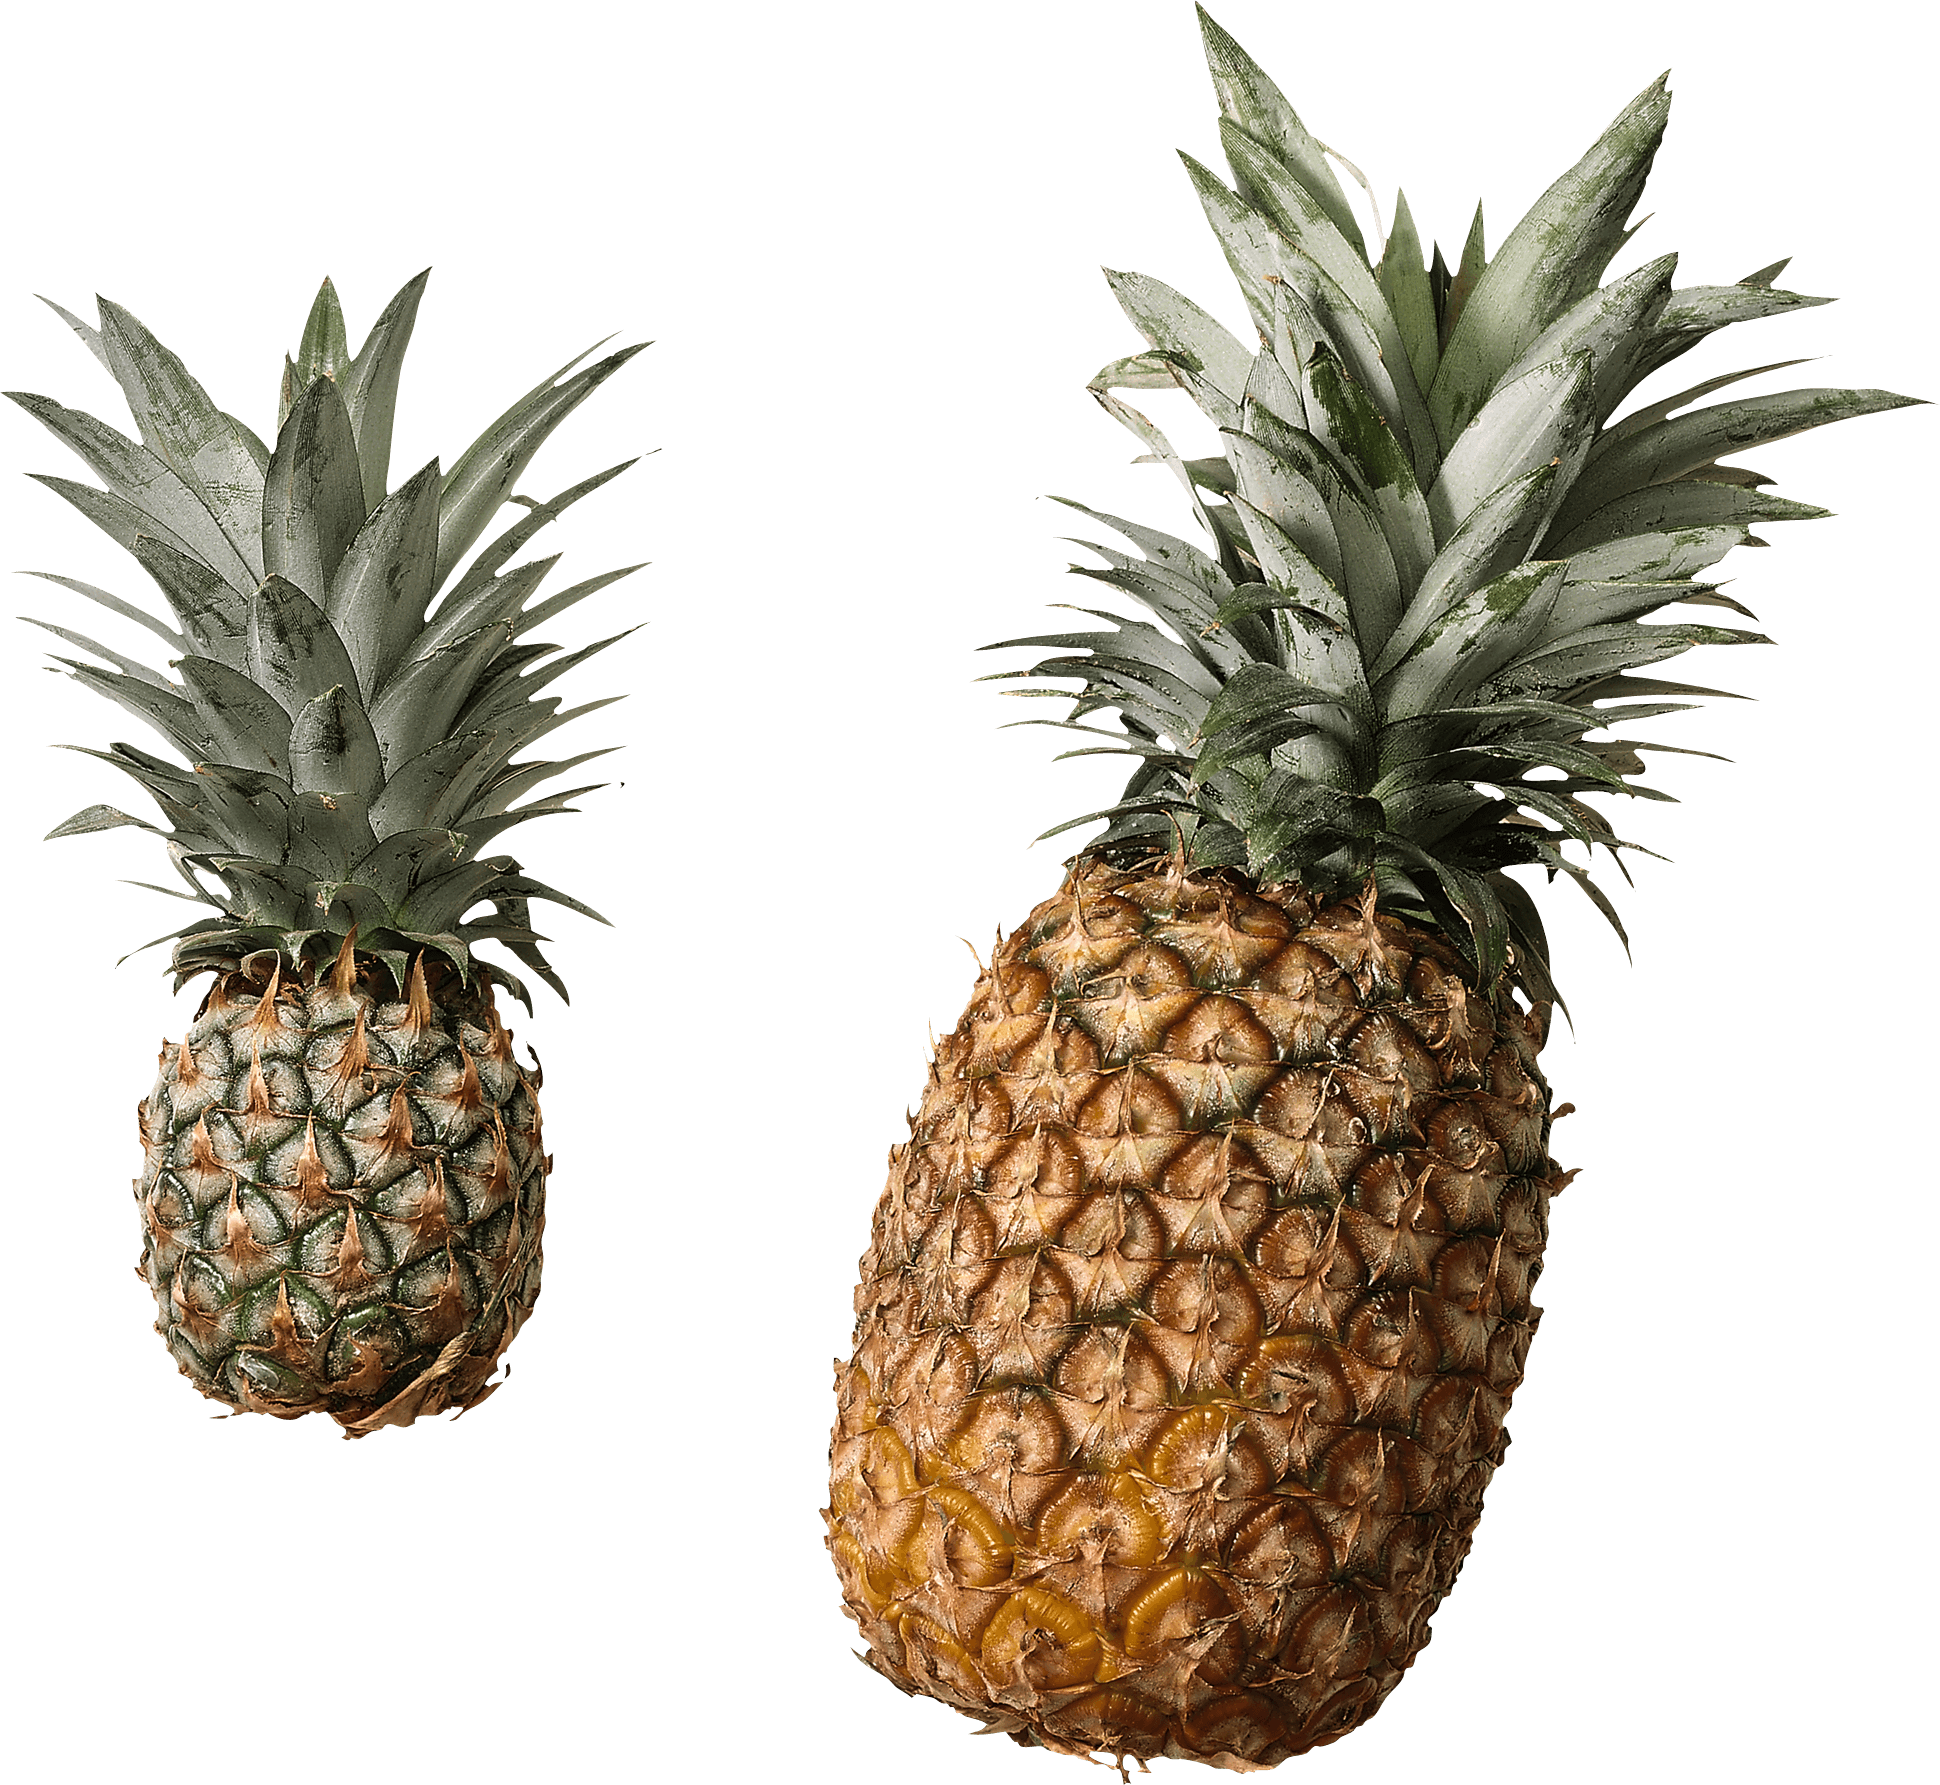 Pineapple Png Image Download PNG Image